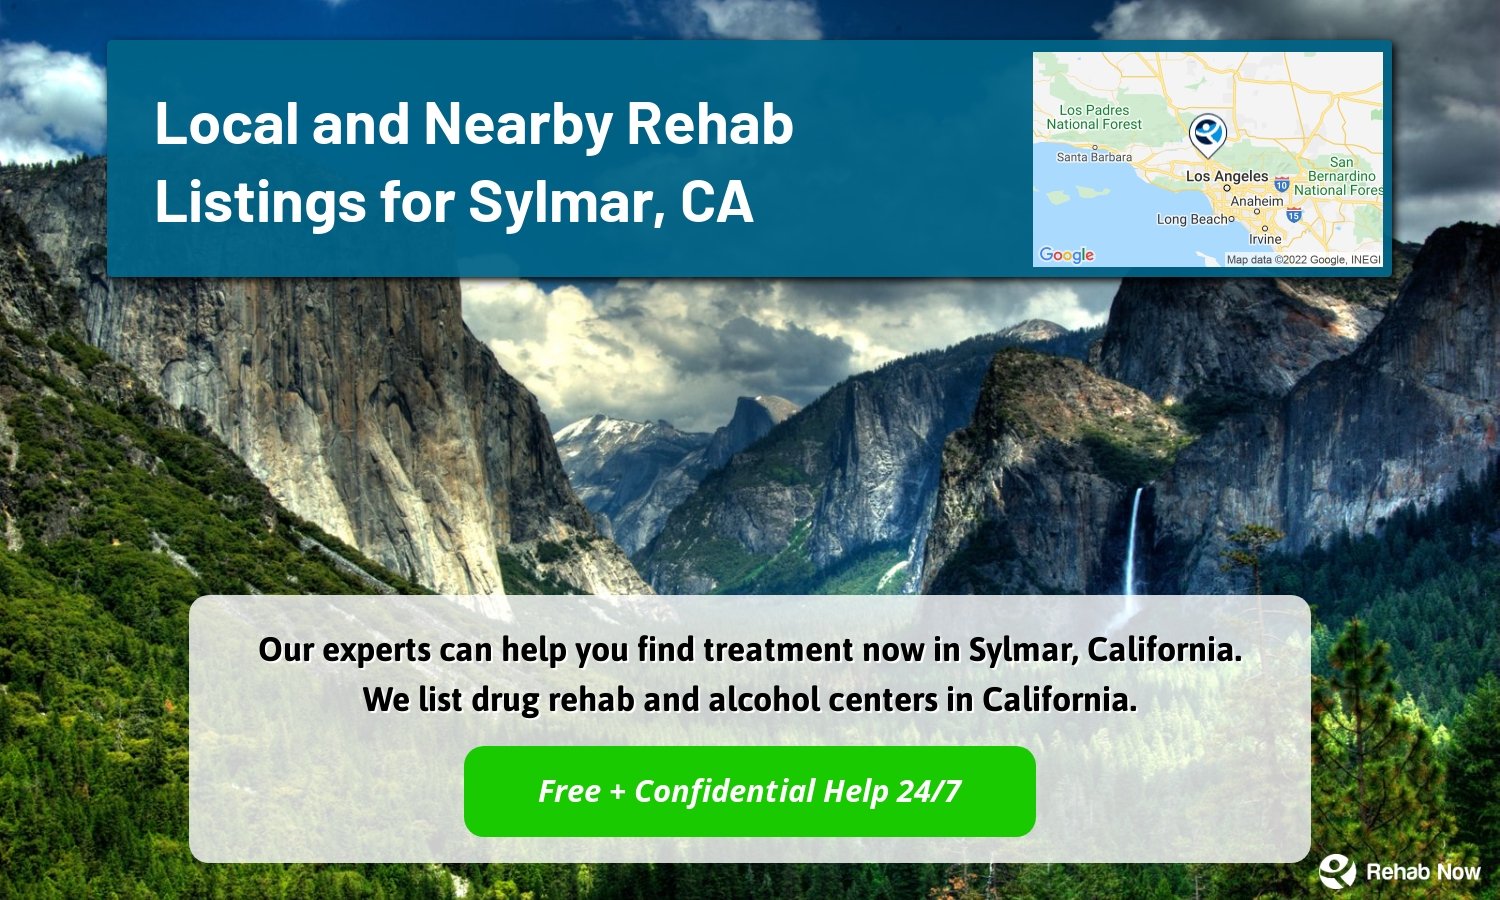 Our experts can help you find treatment now in Sylmar, California. We list drug rehab and alcohol centers in California.